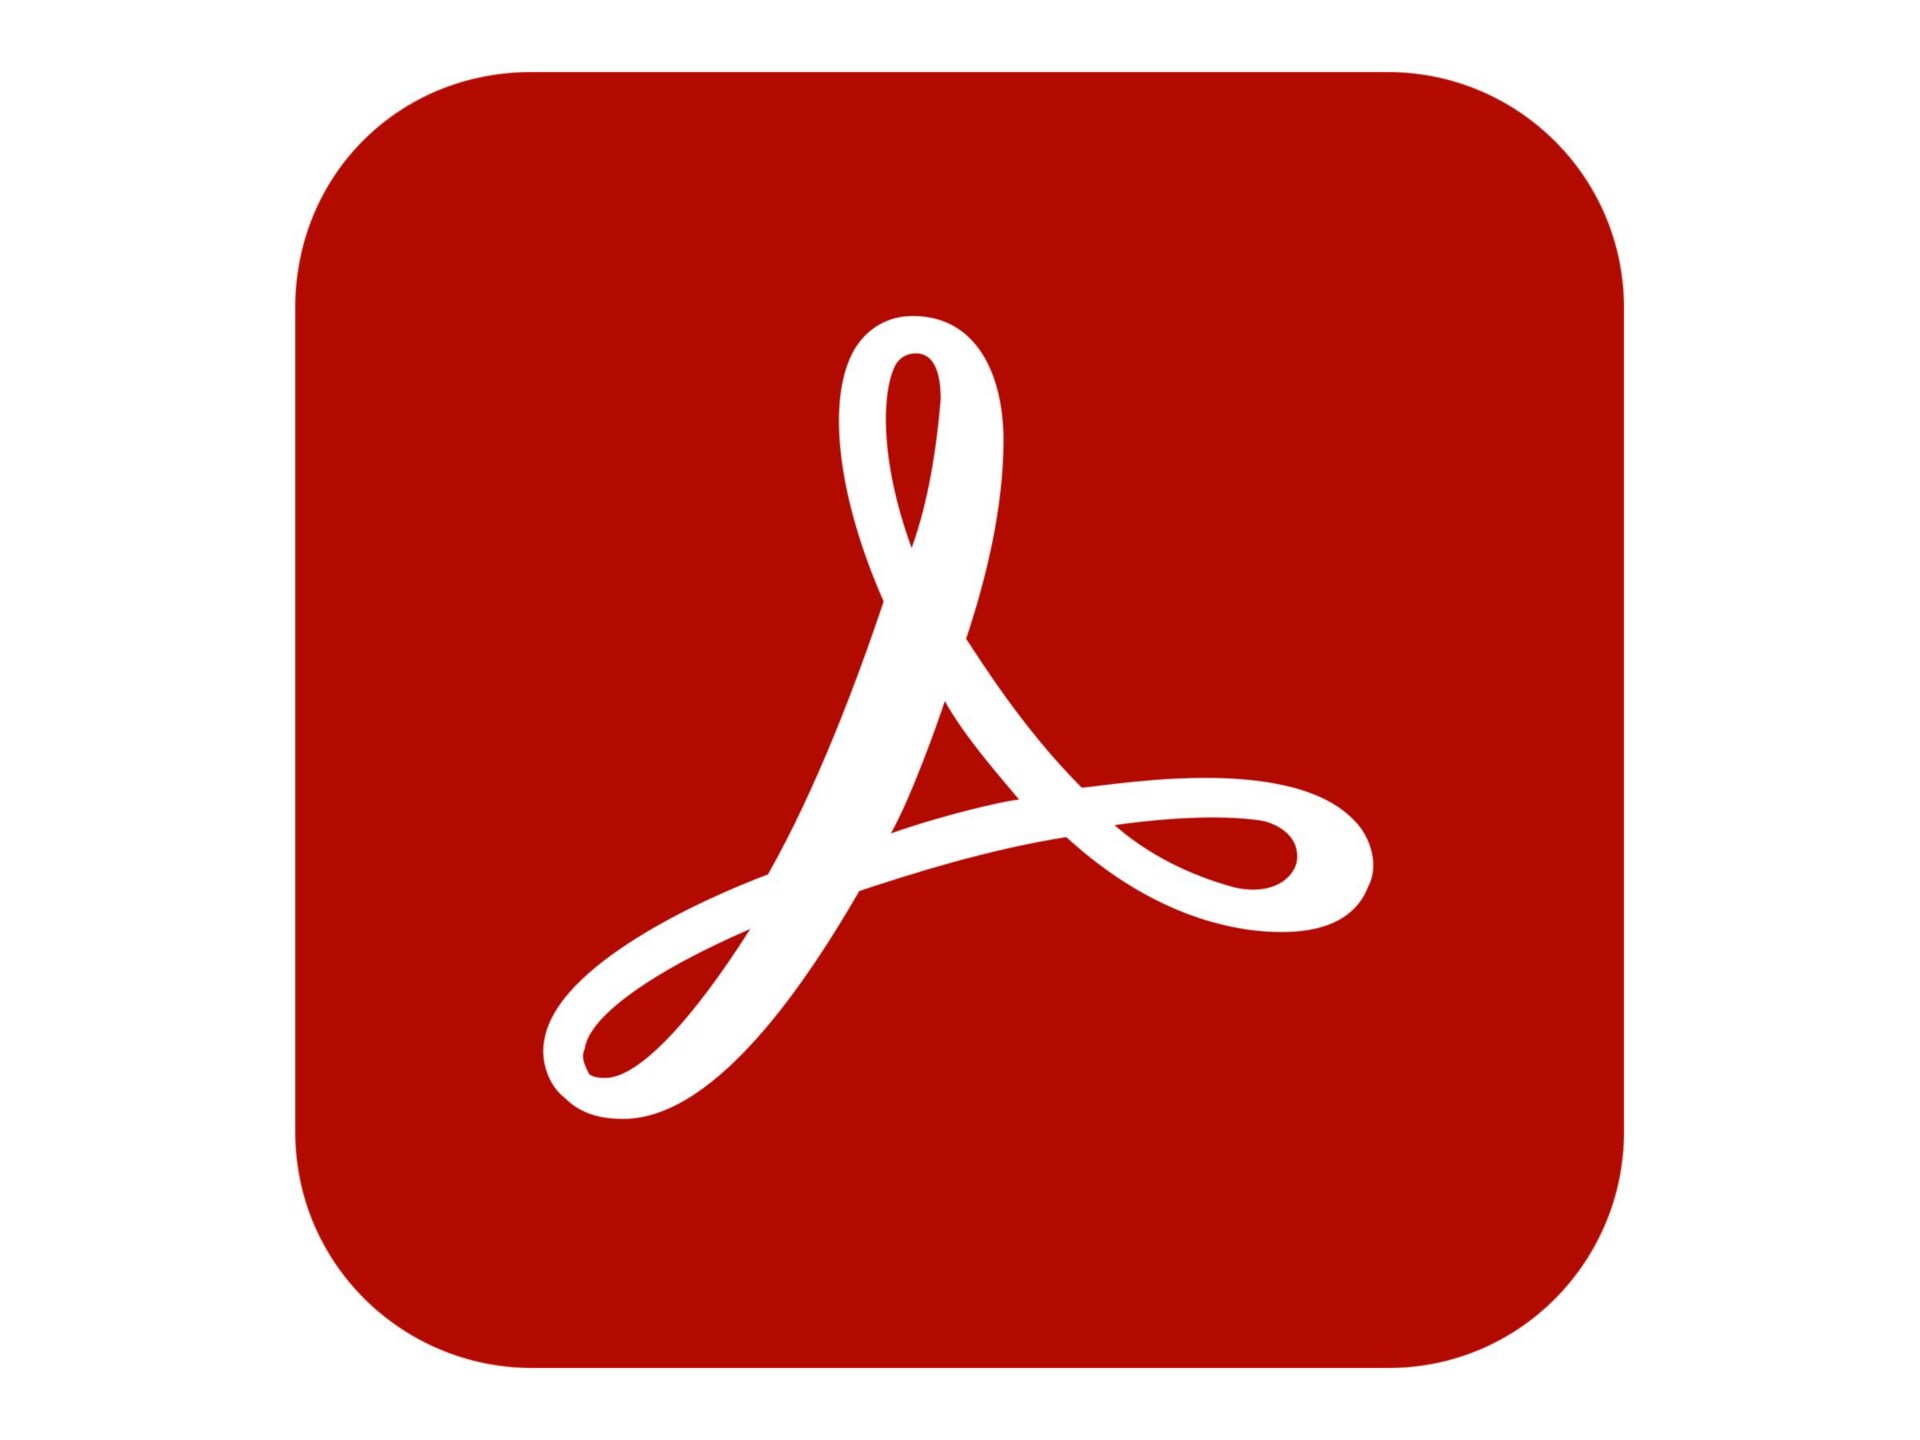 Adobe Acrobat Pro DC for Teams - Subscription New (11 months) - 1 user